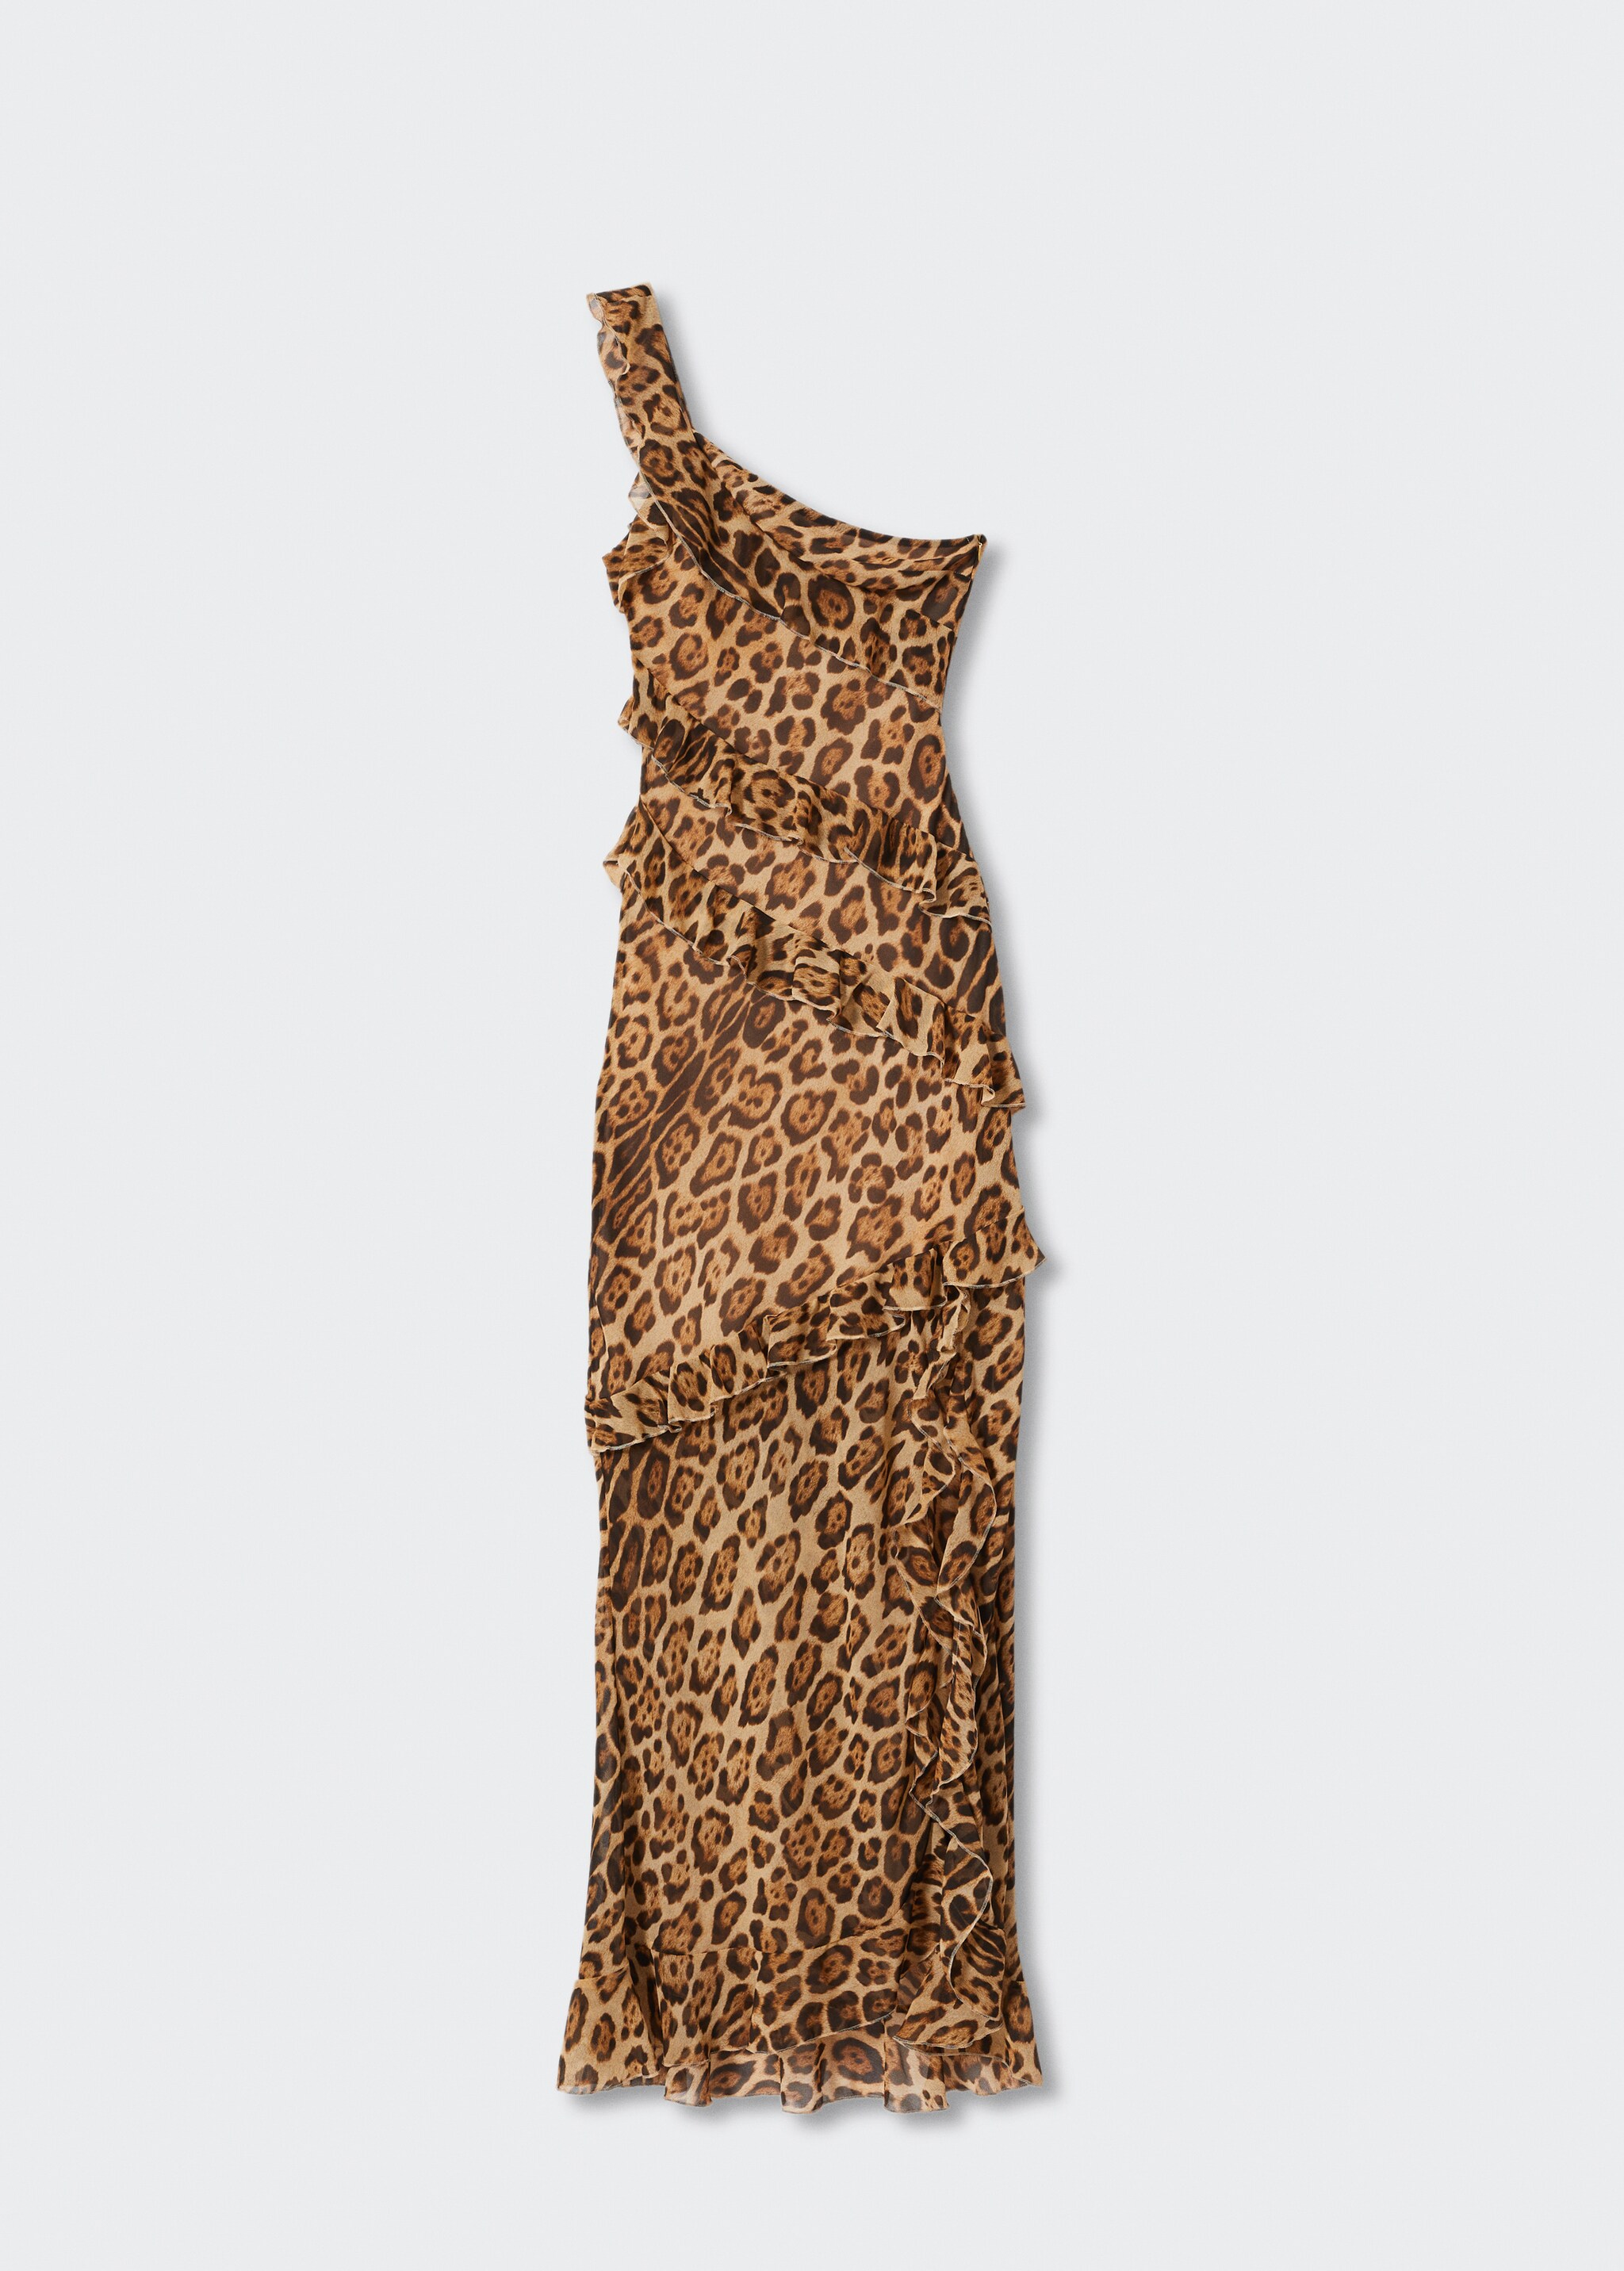 Asymmetrical animal-print dress - Article without model